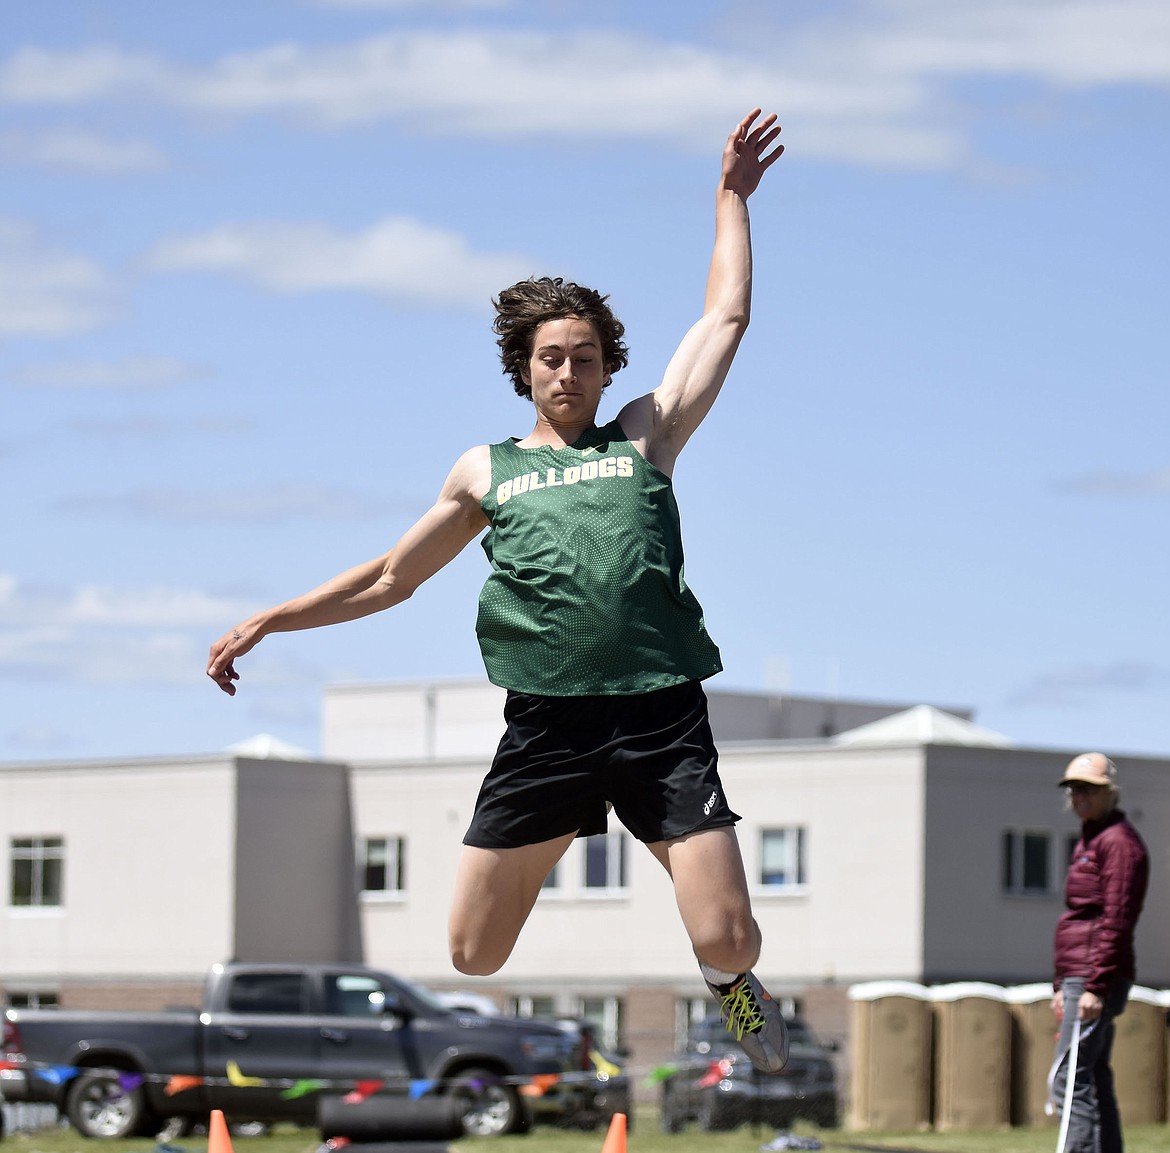 Gabe Menicke competes in the triple jump, taking first in the event at the Western A divisional track meet in Columbia Falls on Saturday. (Teresa Byrd/Hungry Horse News)